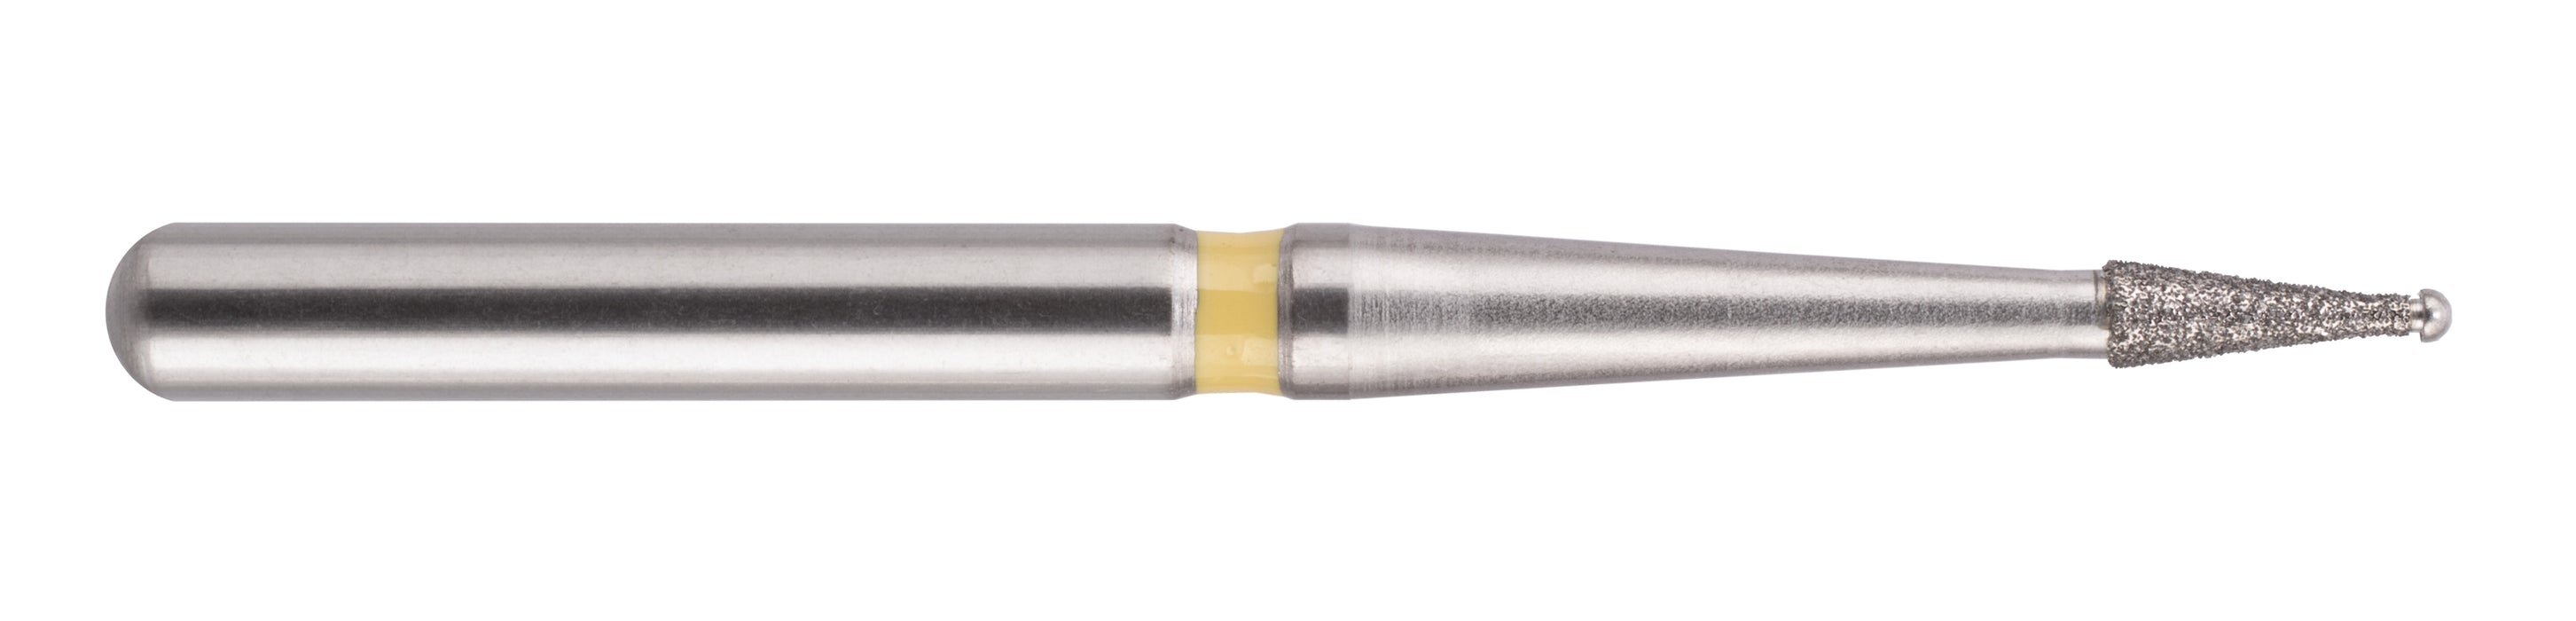 E216 - Conical blunt end